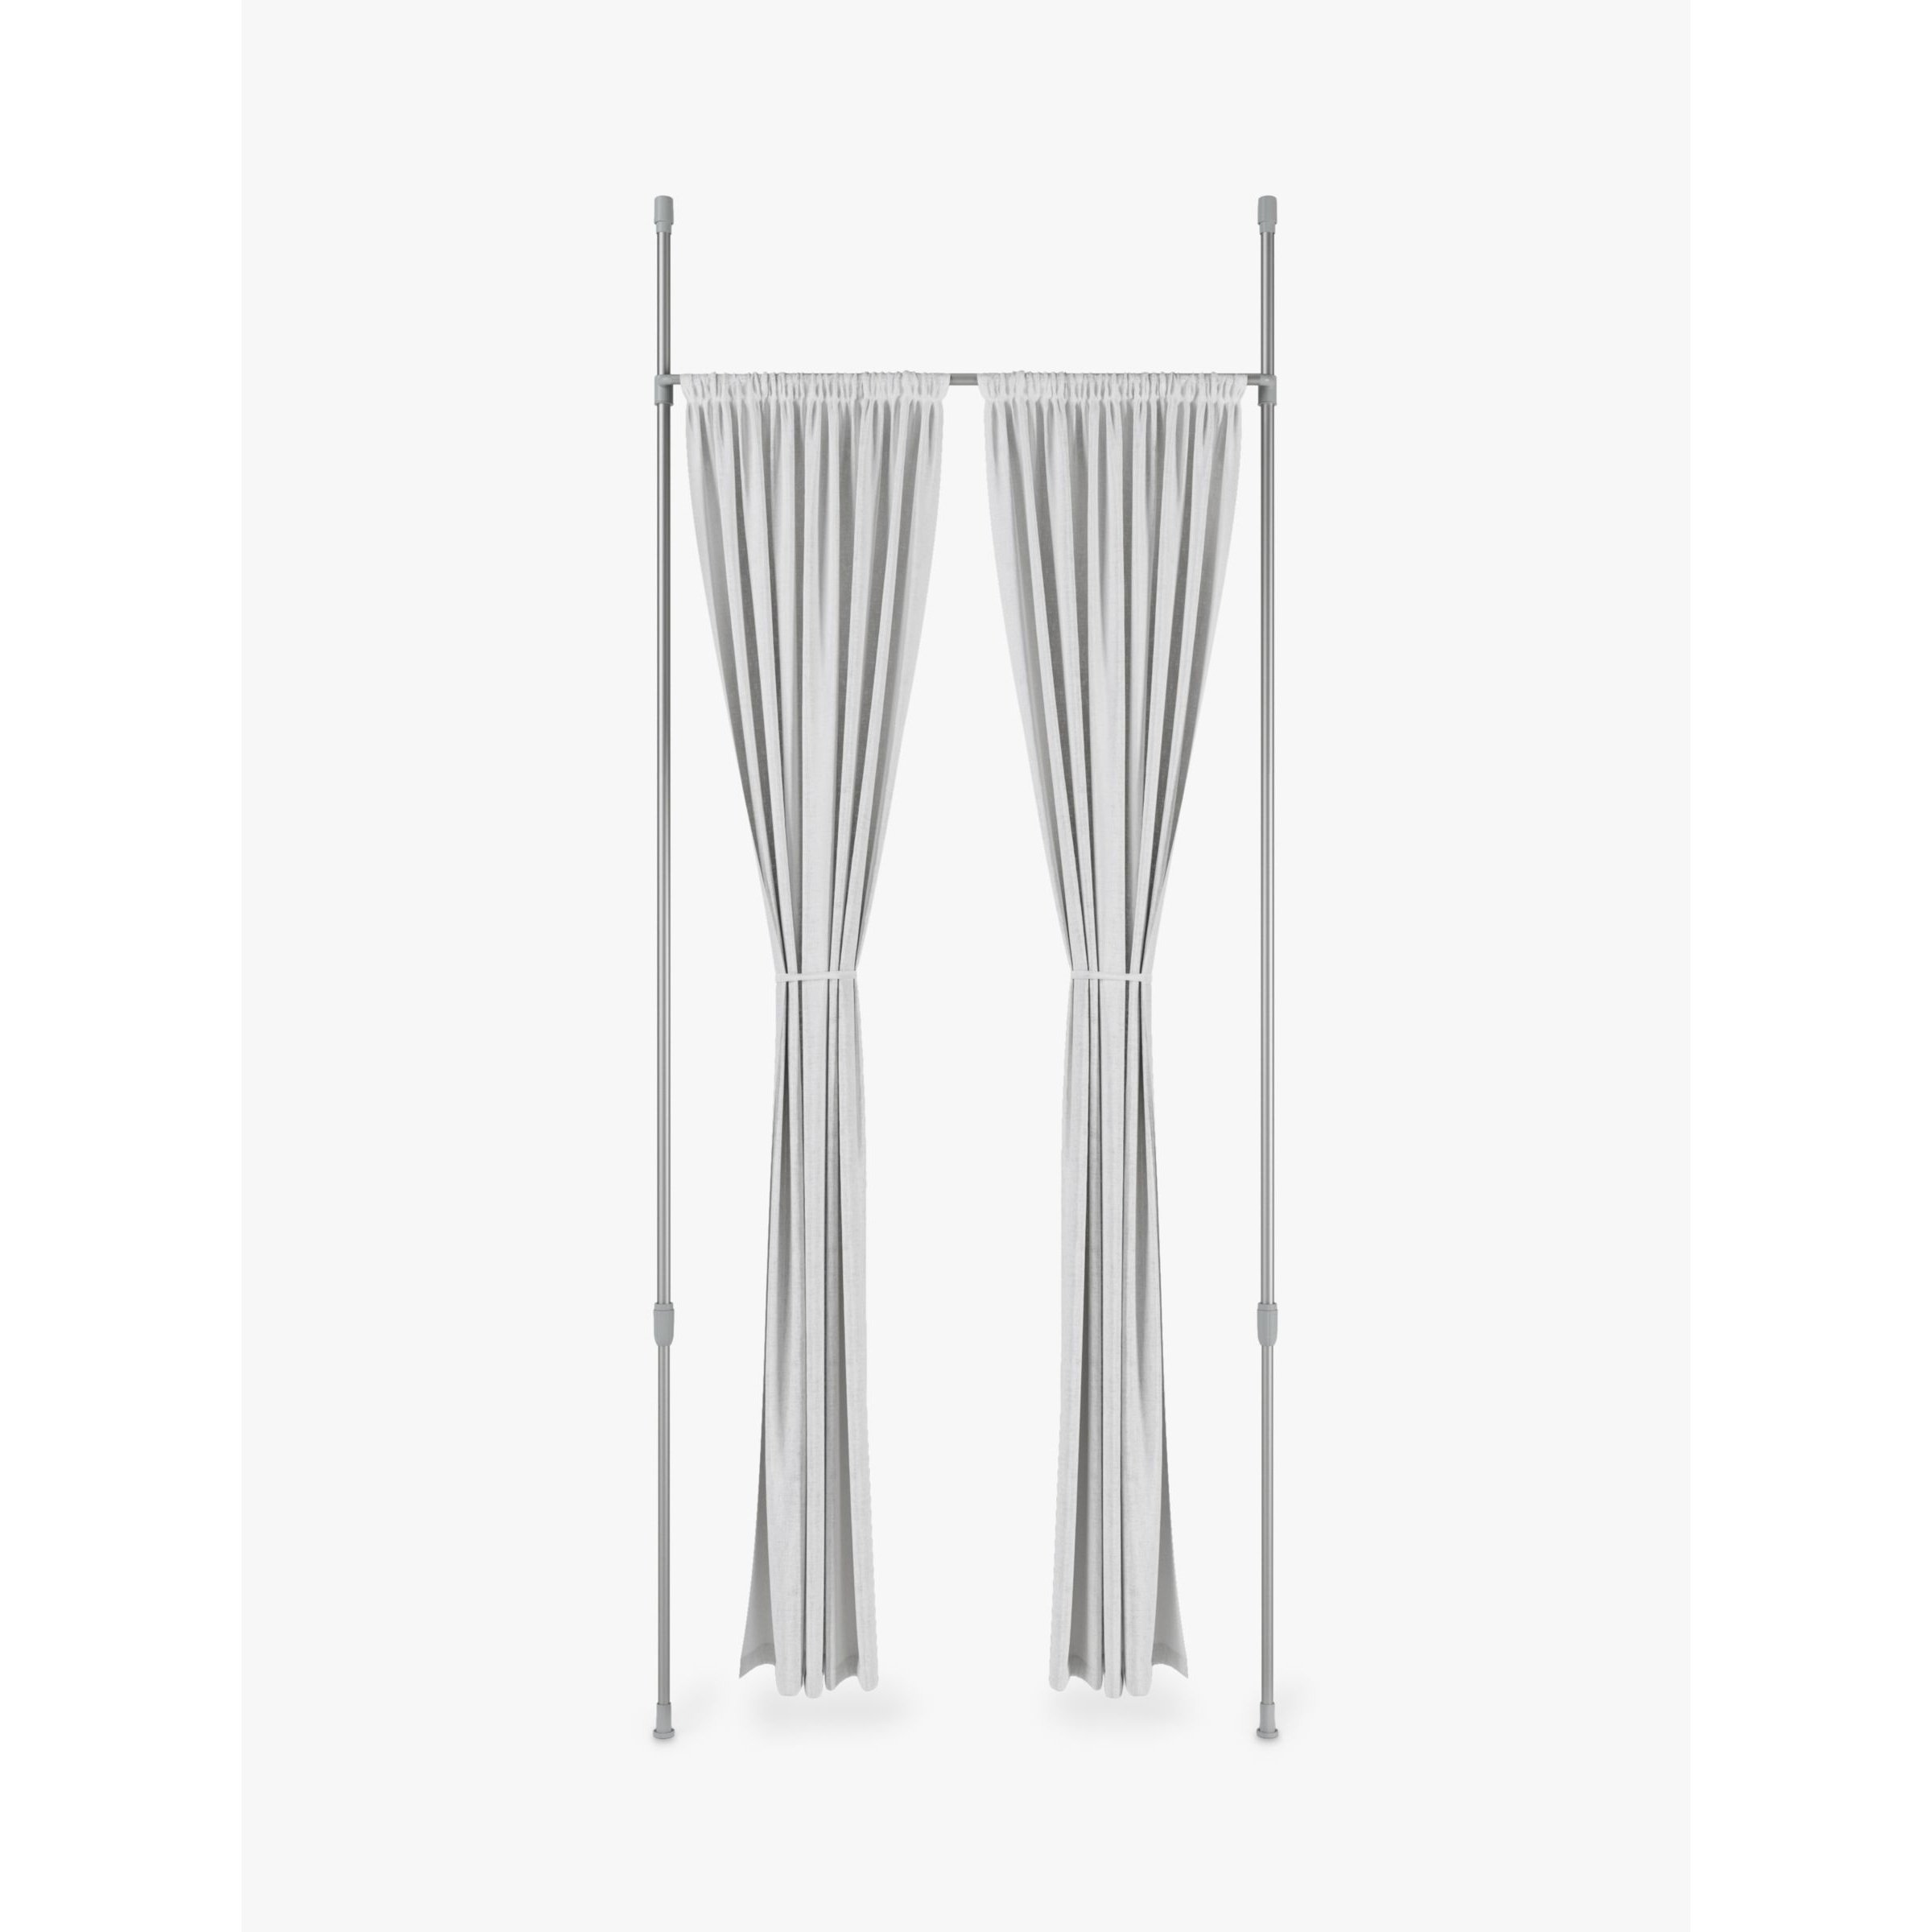 Umbra Anywhere Extendable Curtain Rod and Room Divider